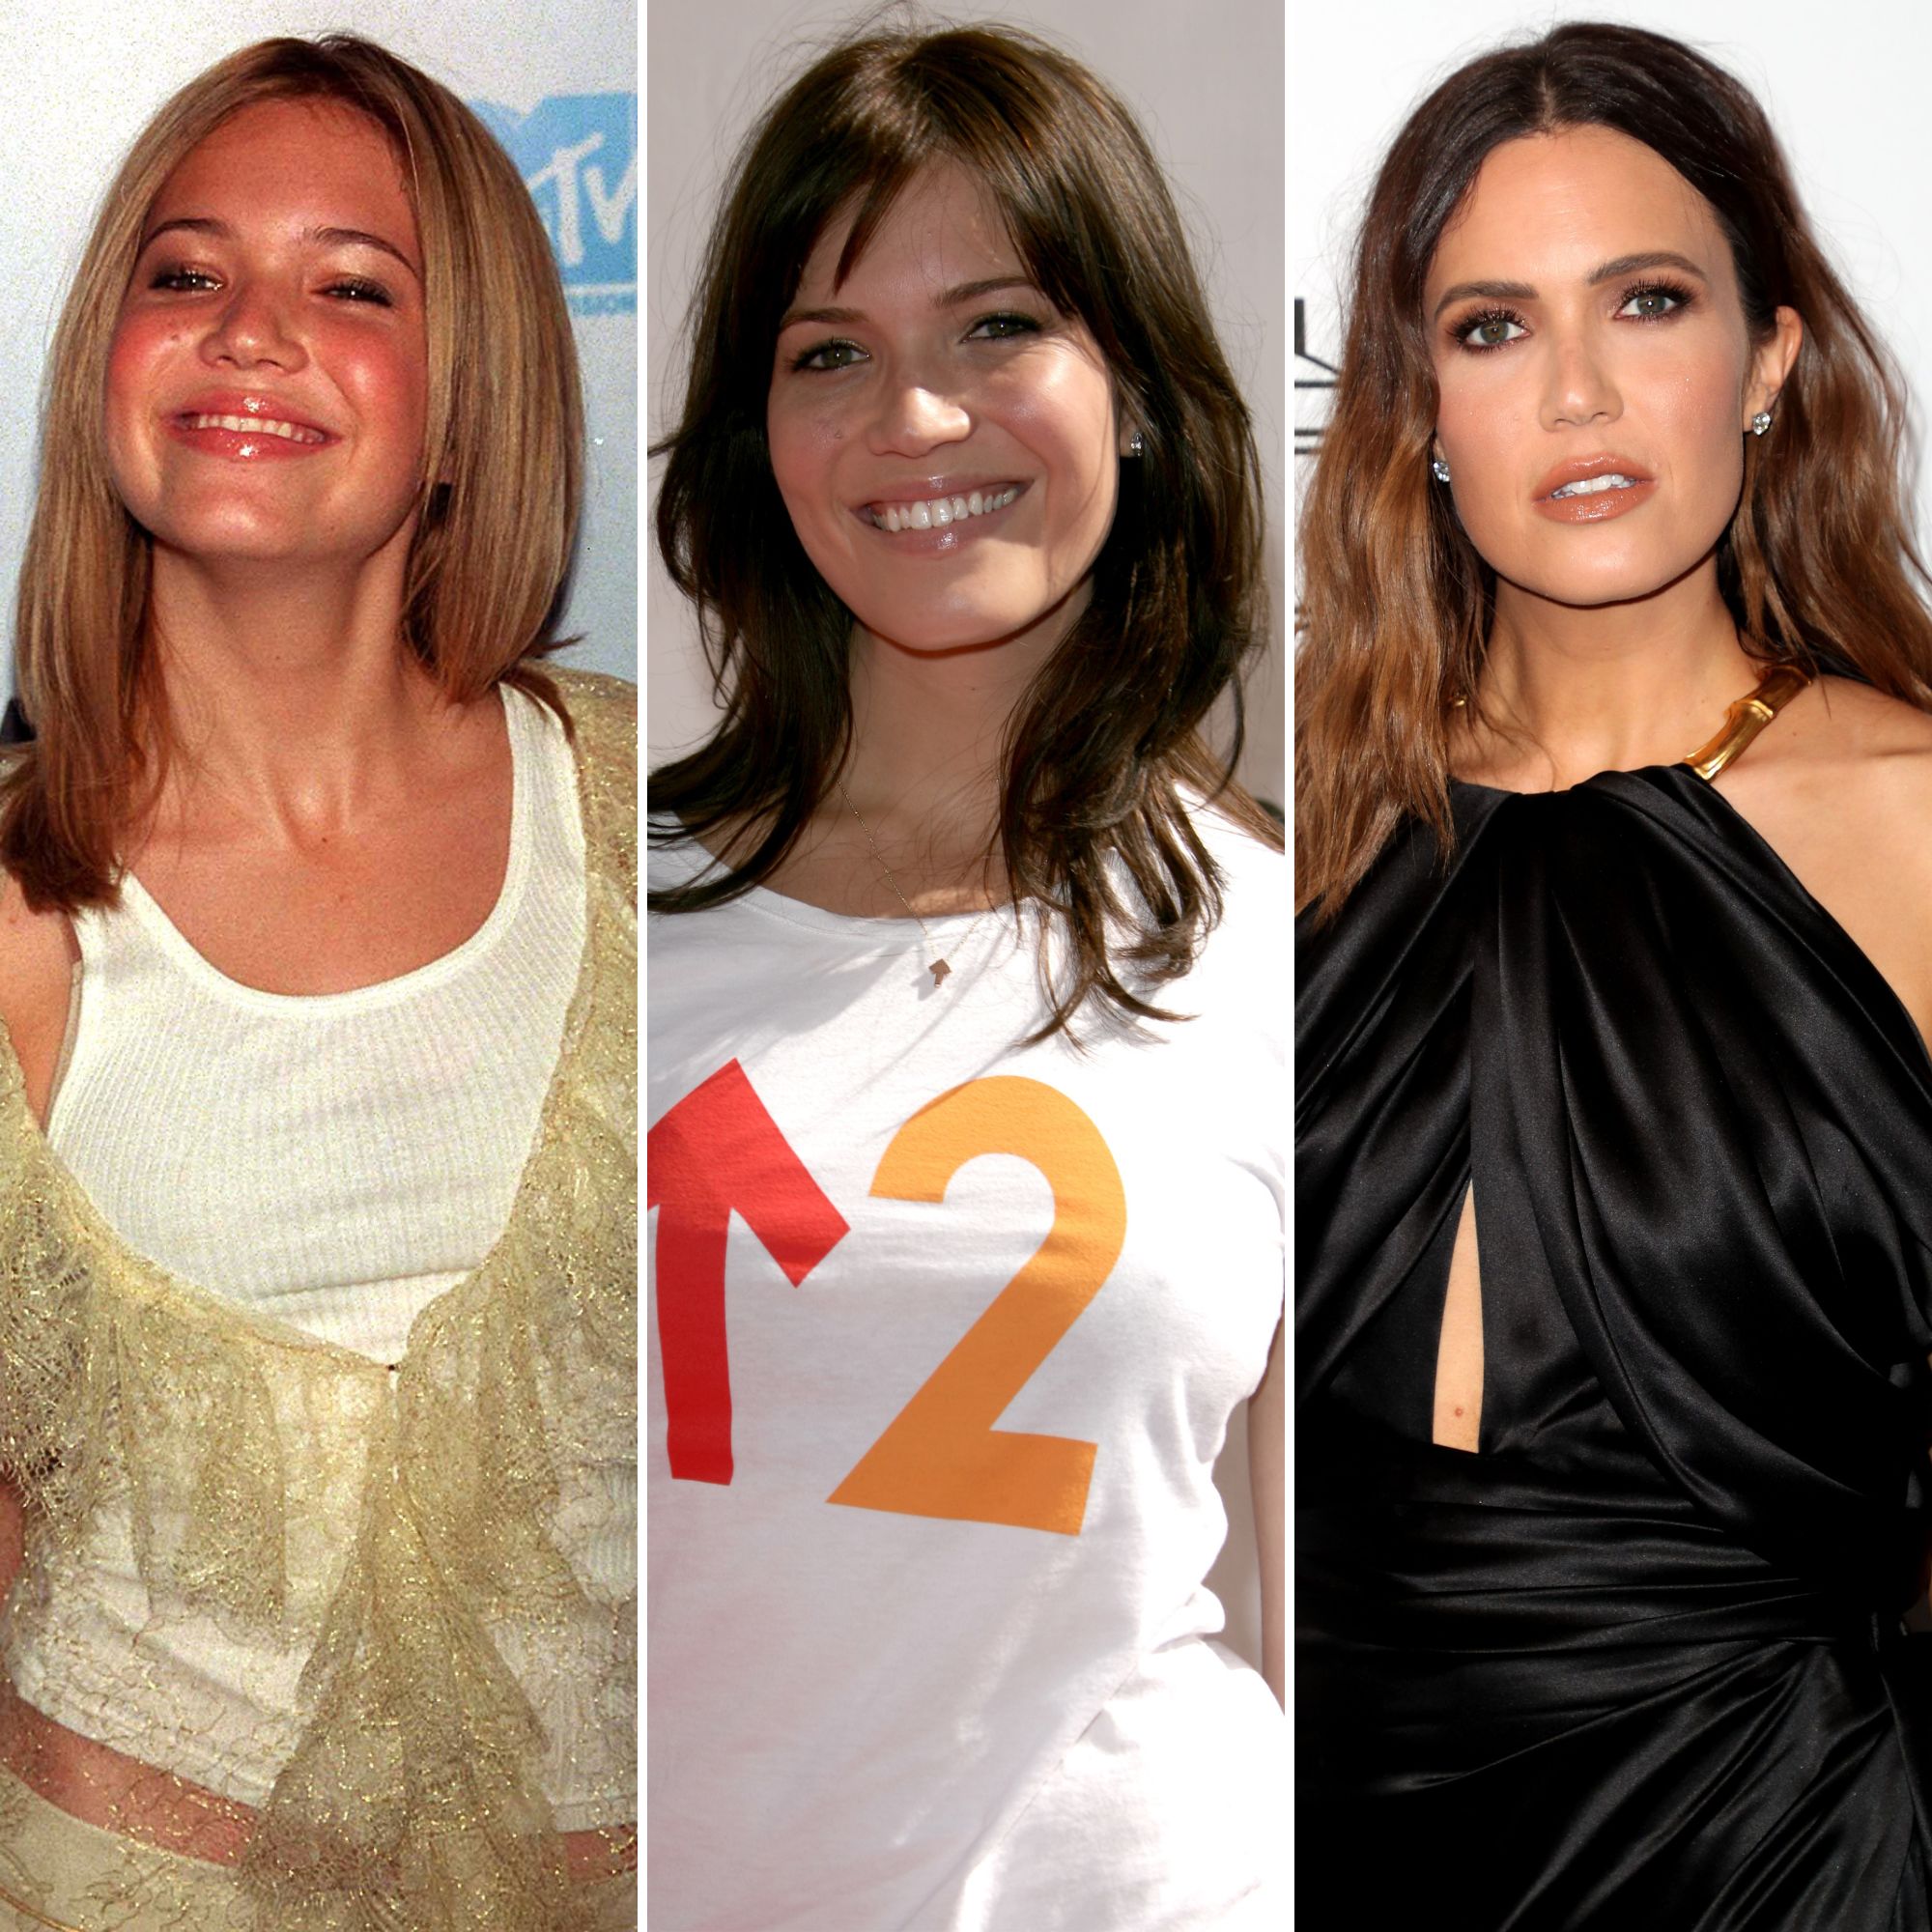 Mandy Moore Porn Lez - Mandy Moore's Transformation Over the Years: Photos Then, Now